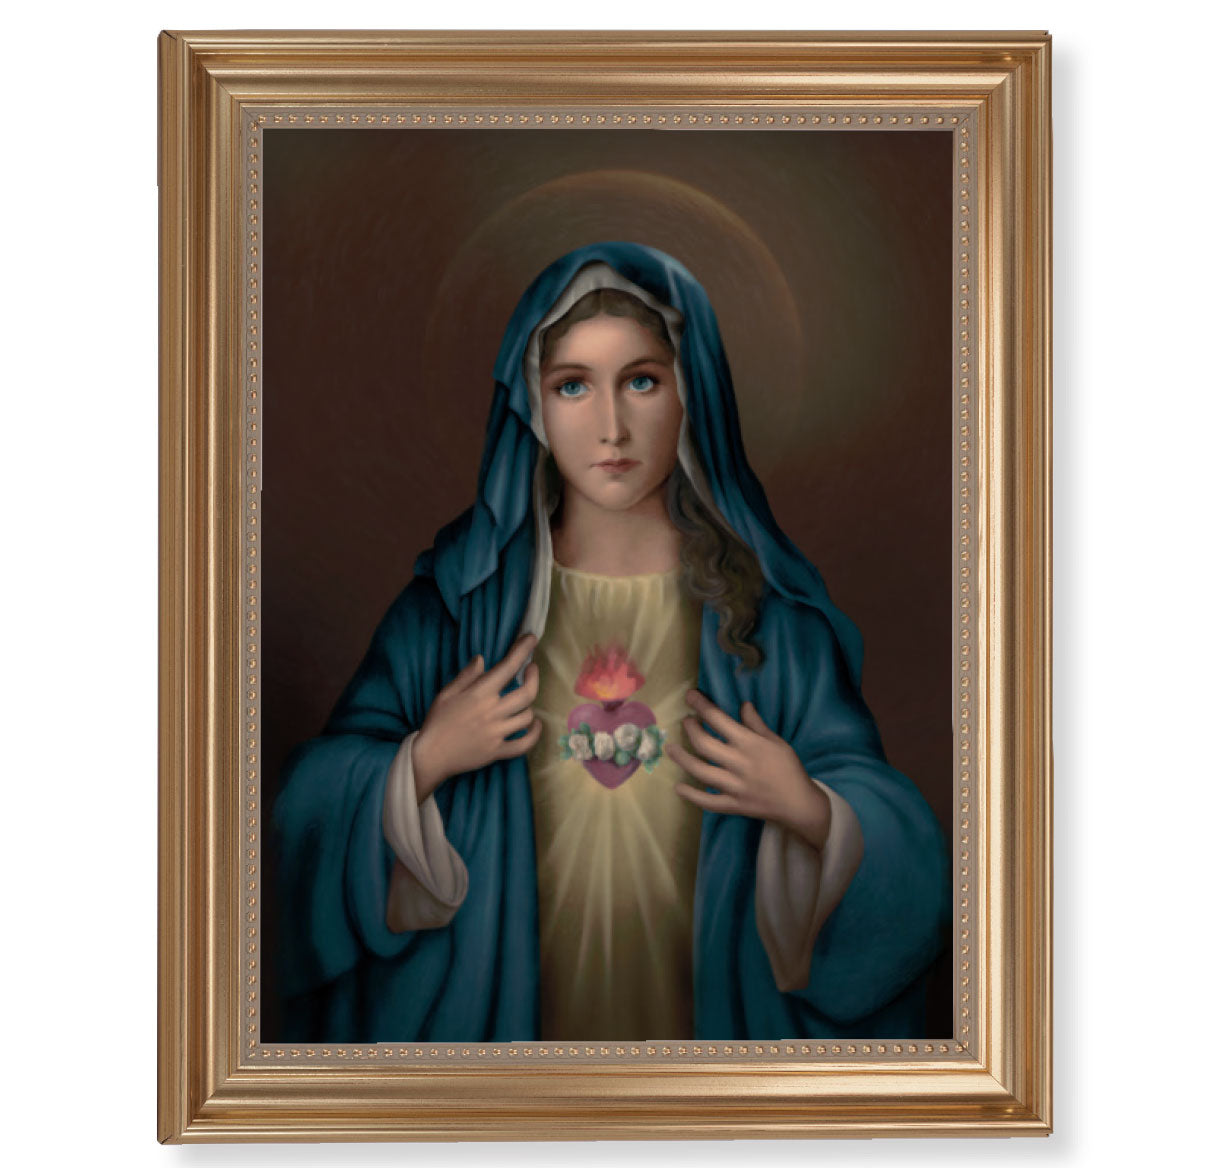 Immaculate Heart of Mary Picture Framed Wall Art Decor, Extra Large, Classic Gold-Leaf Fluted Frame with Beaded Lip